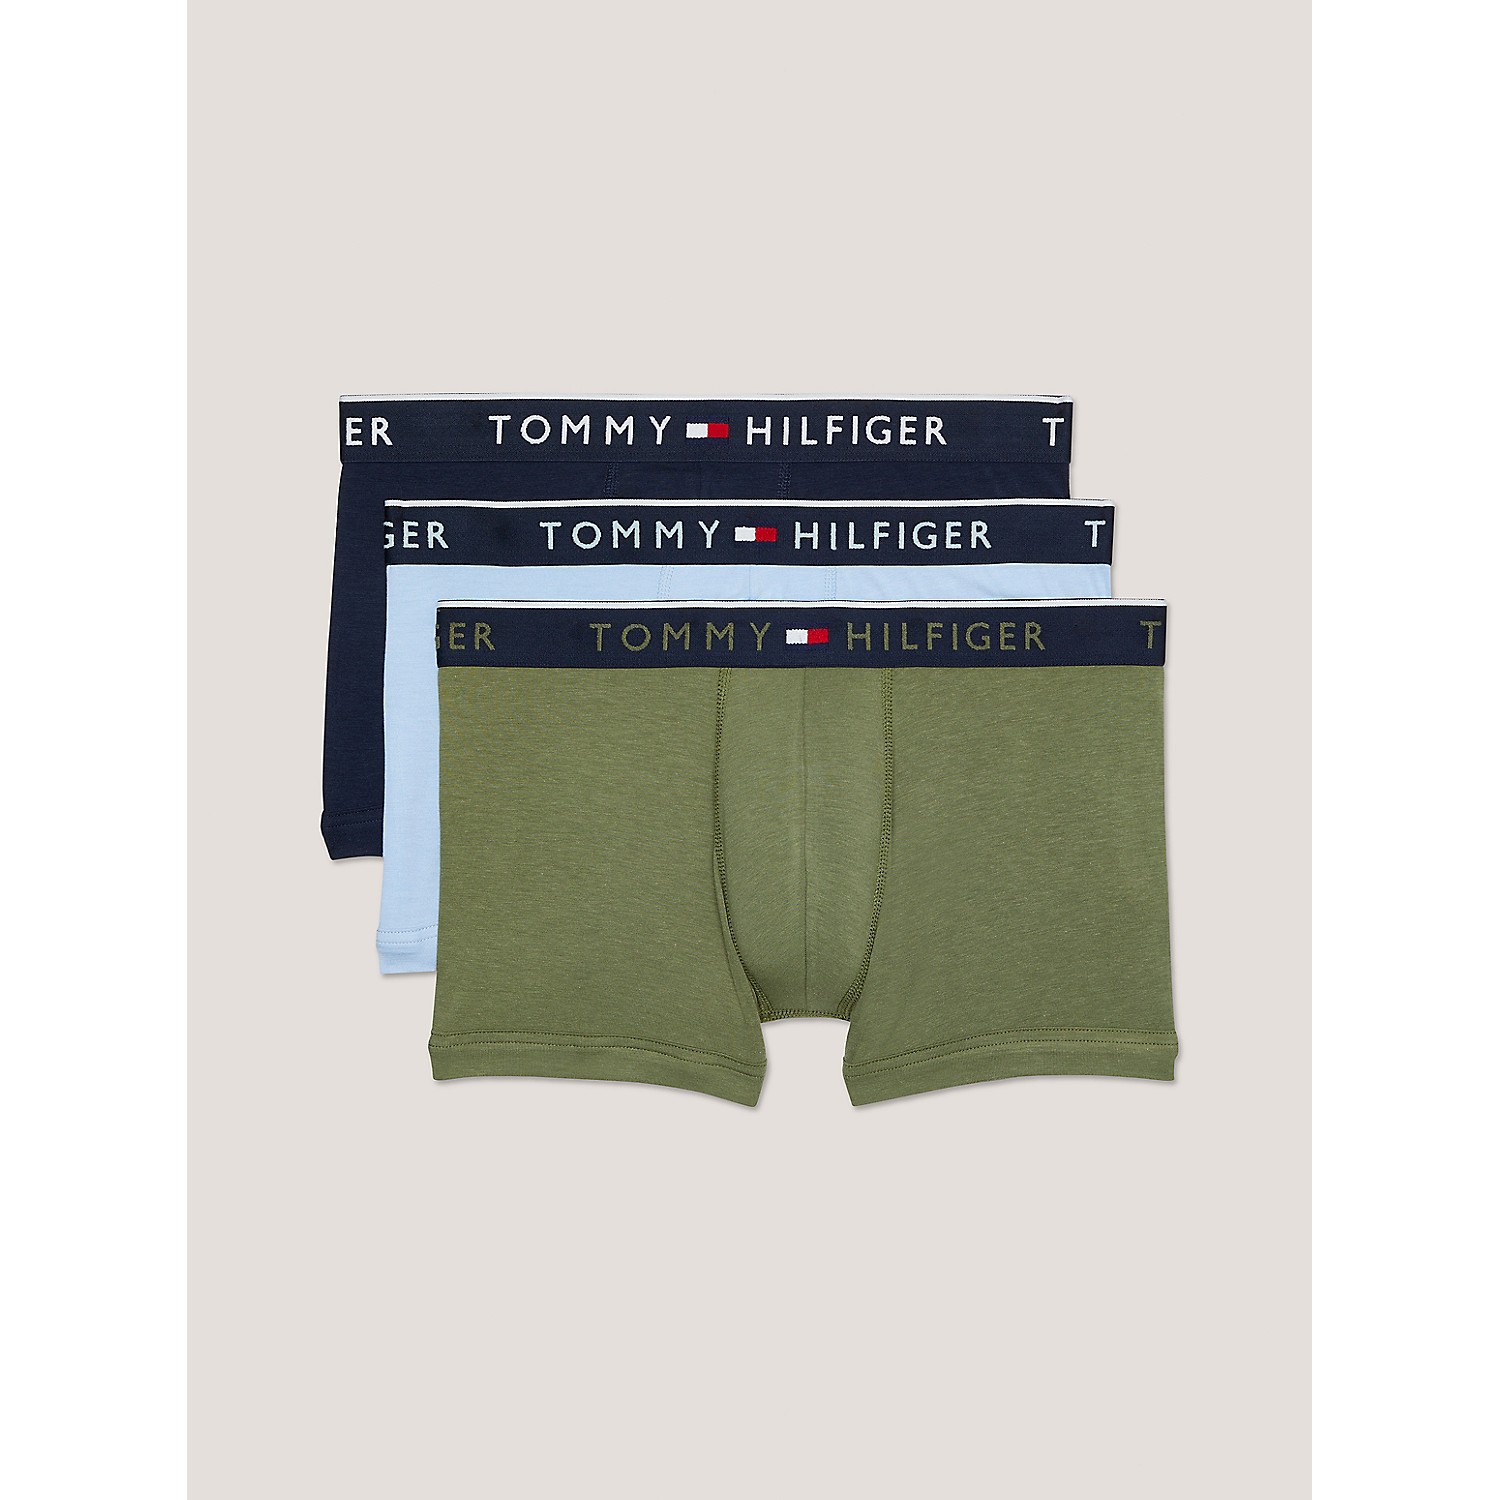 TOMMY HILFIGER Essential Luxe Stretch Trunk 3-Pack